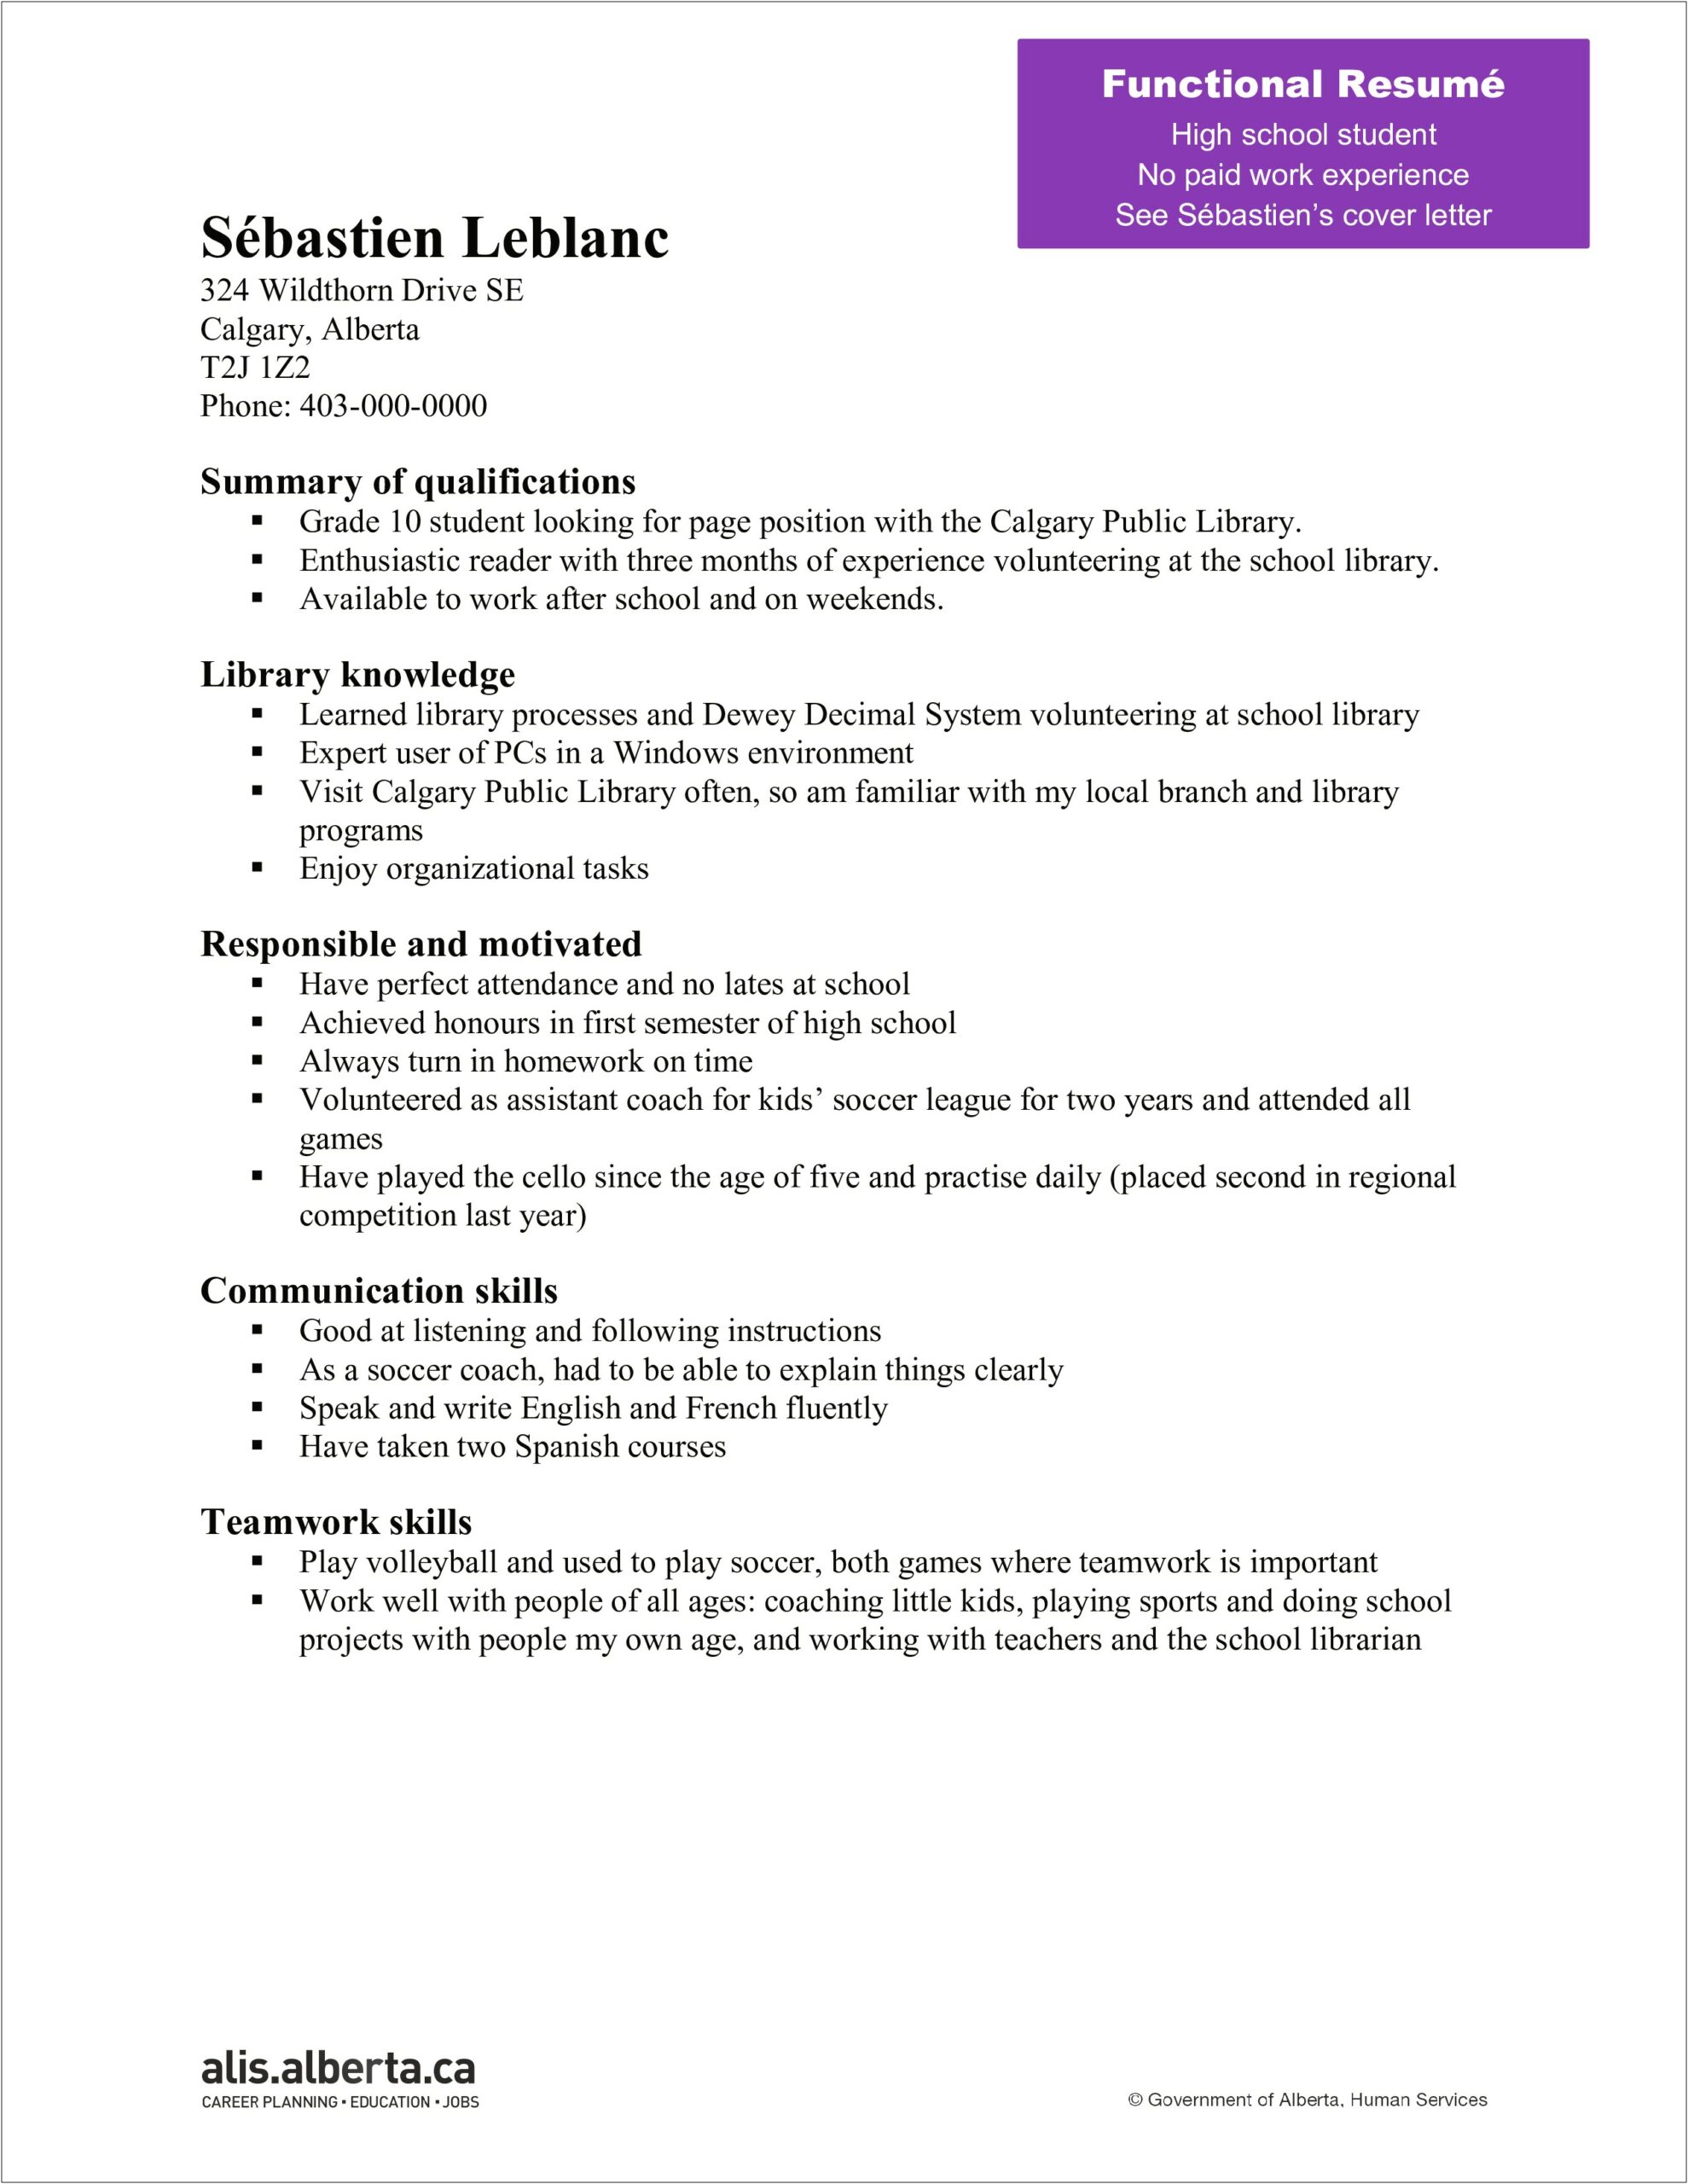 Resume Background Summary For High School Student